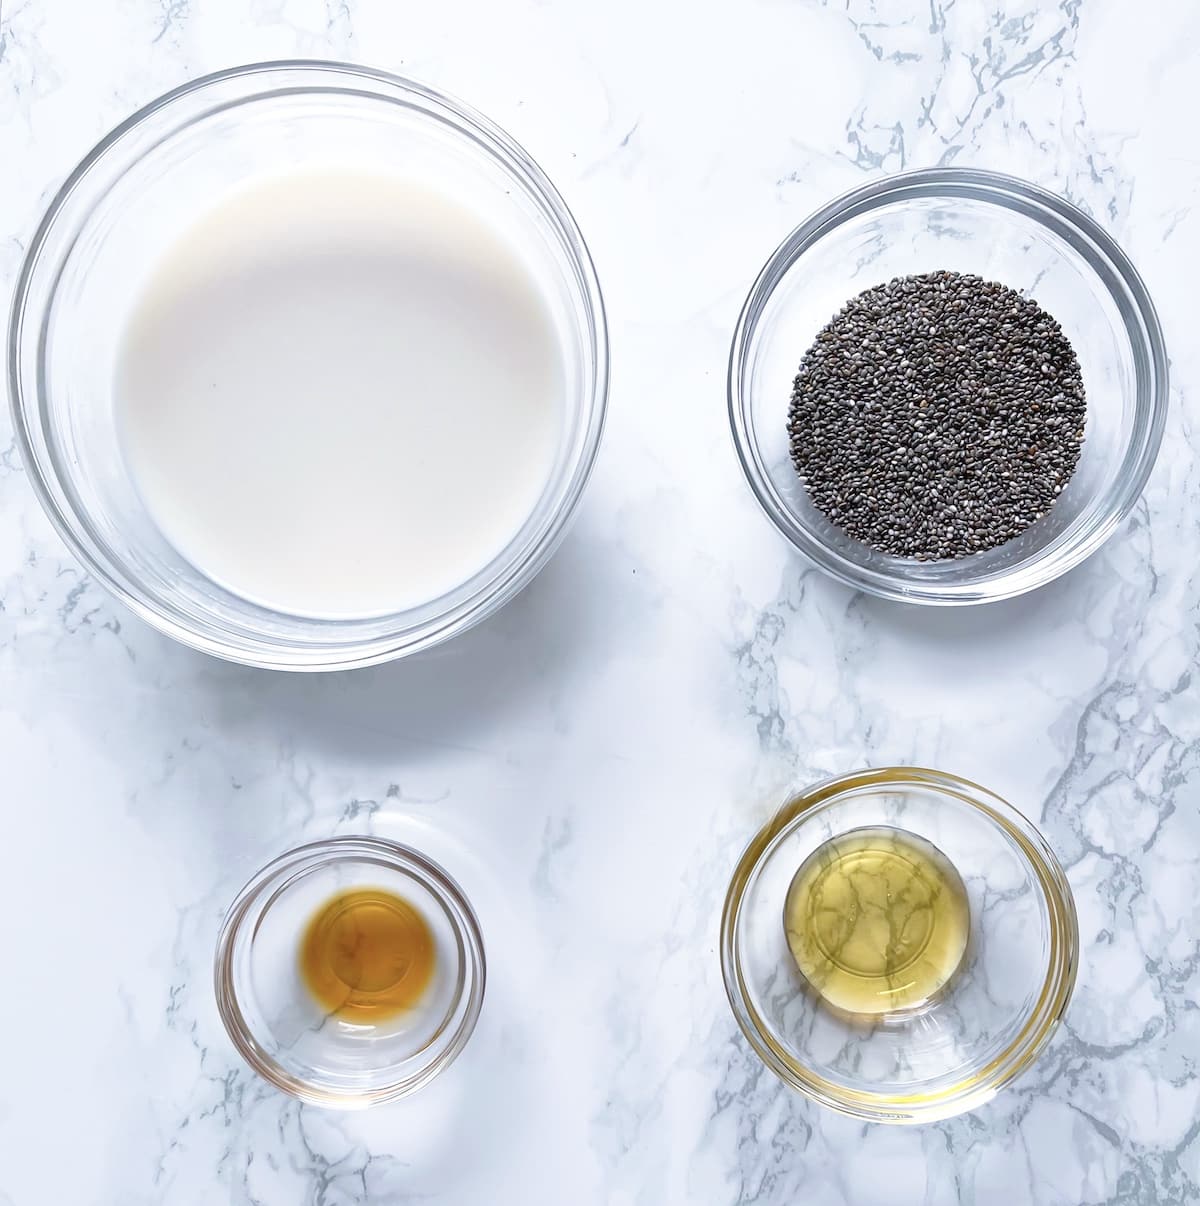 ingredients for chia seeds overnight including glass bowls with nondairy milk, chia seeds, honey, and vanilla extract on a marble table